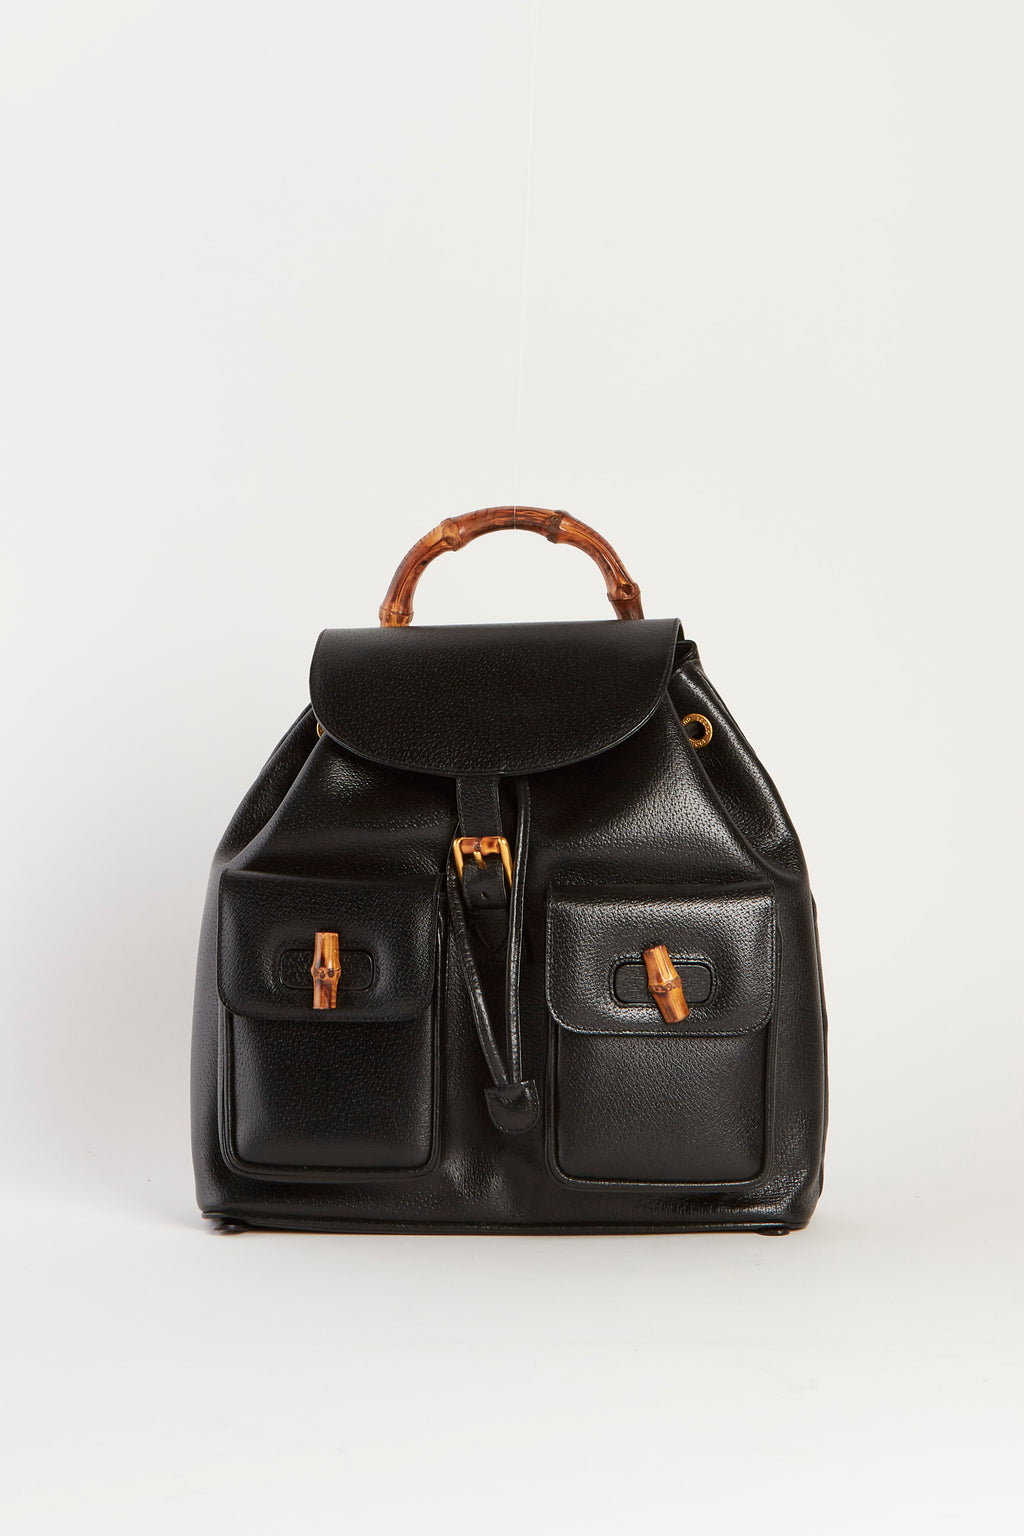 Vintage Gucci  Bamboo & Leather Backpack